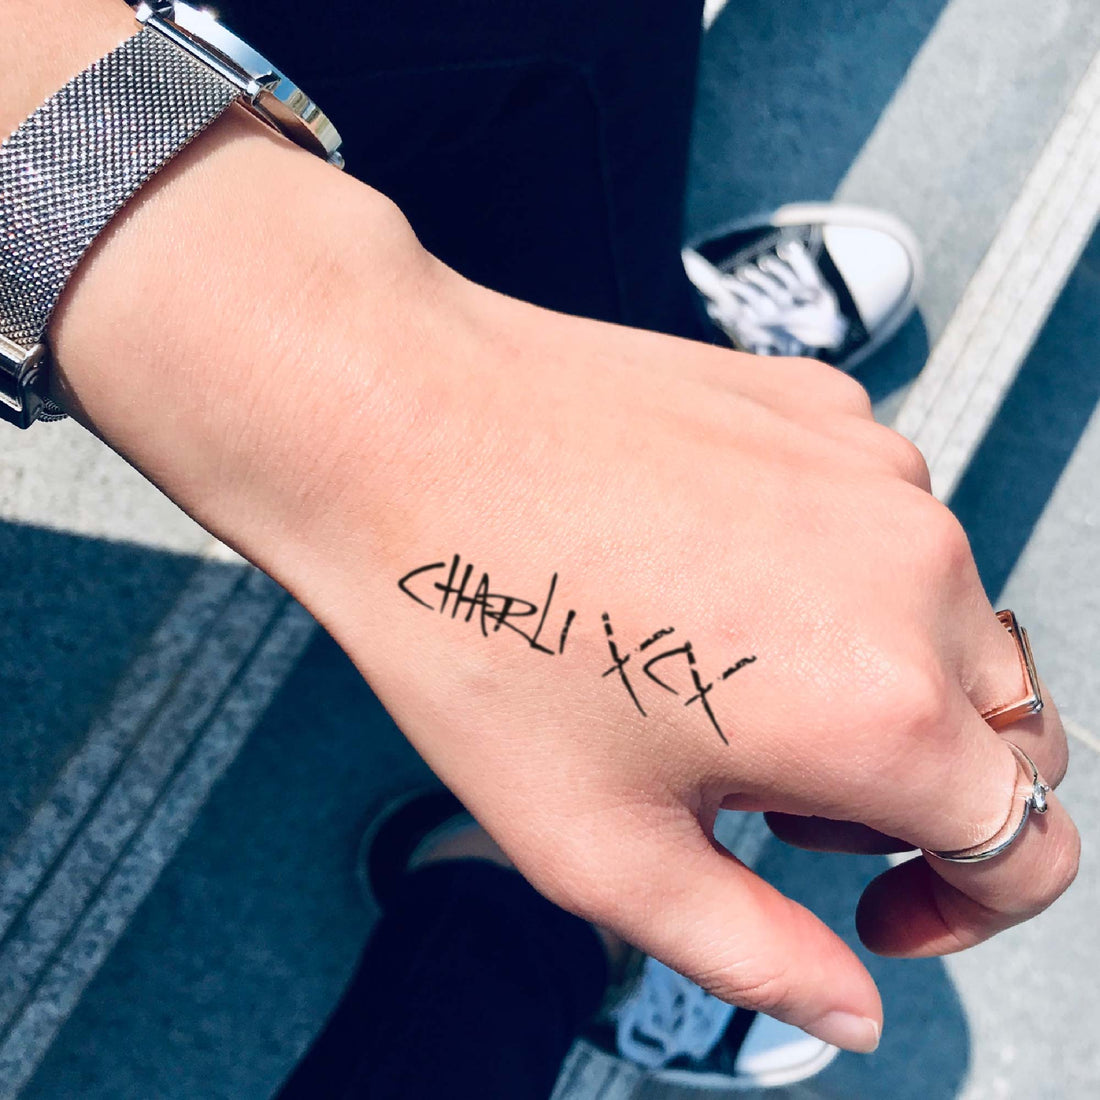 Charli XCX custom temporary tattoo sticker design idea inspiration meanings removal arm wrist hand words font name signature calligraphy lyrics tour concert outfits merch accessory gift souvenir costumes wear dress up code